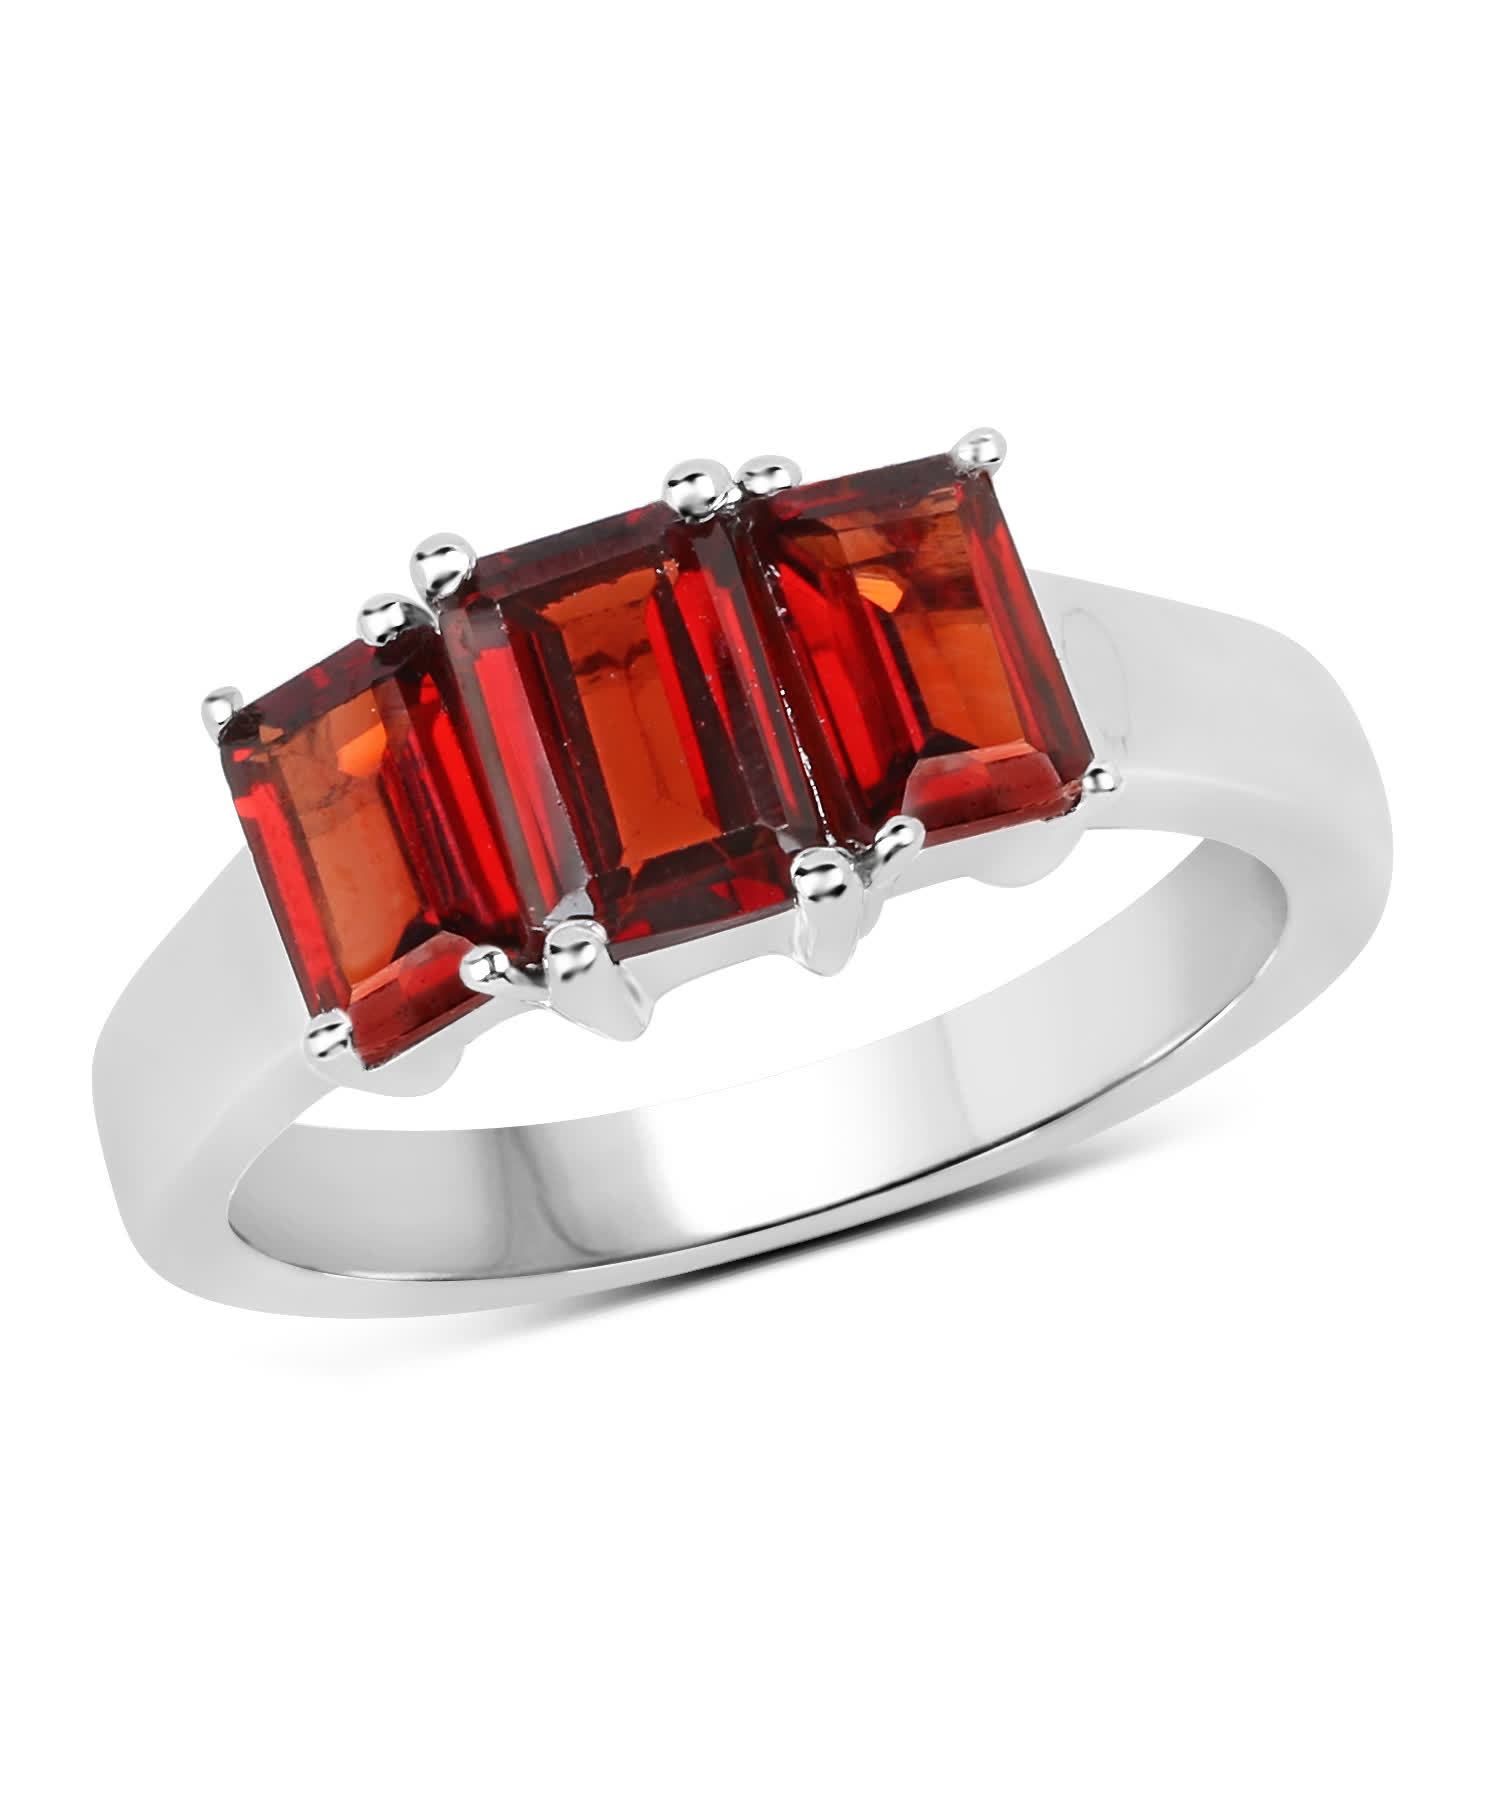 2.80ctw Natural Garnet Rhodium Plated 925 Sterling Silver Three-Stone Ring View 1